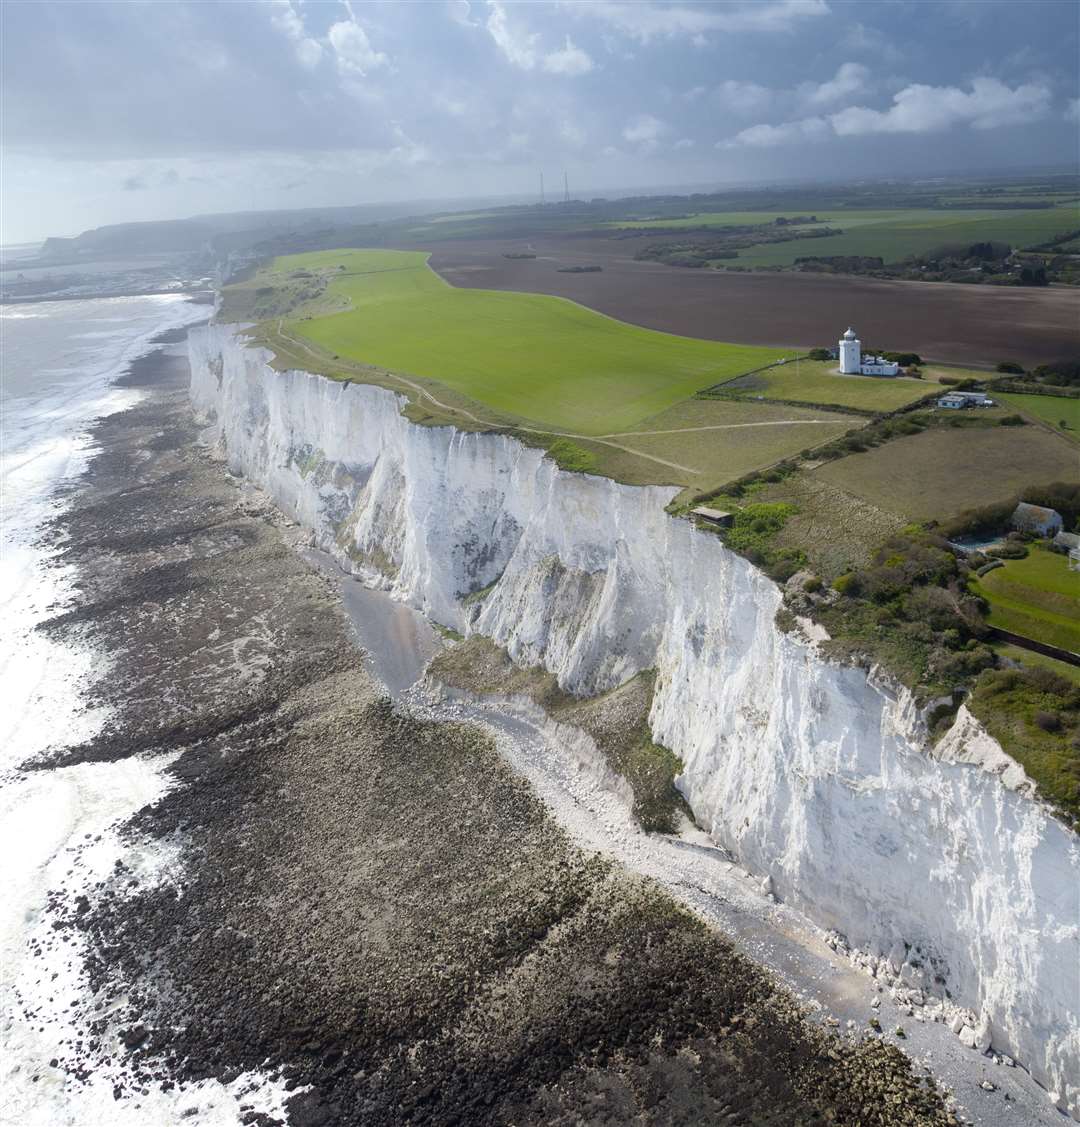 The White Cliffs of Dover coastline and South Foreland lighthouse on the clifftop